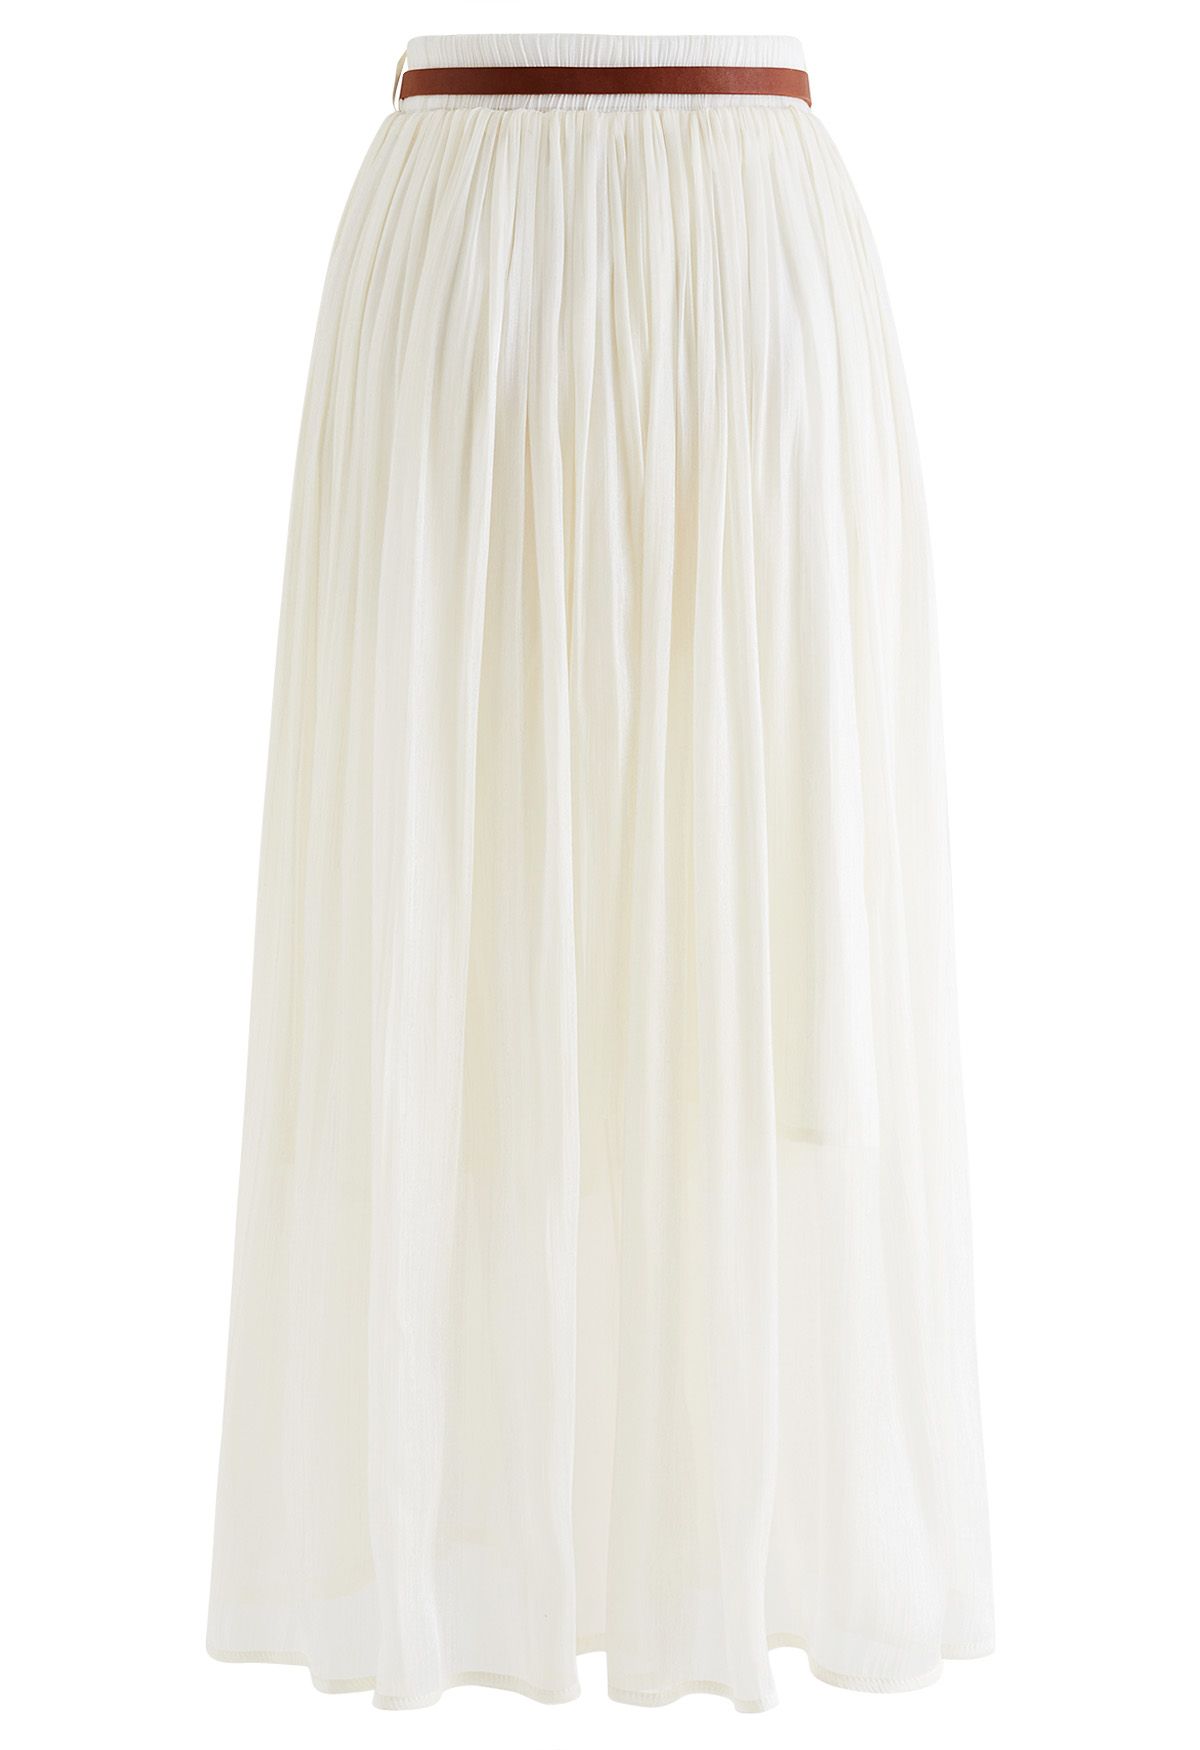 Shimmery Pleated Belt Maxi Skirt in Cream - Retro, Indie and Unique Fashion